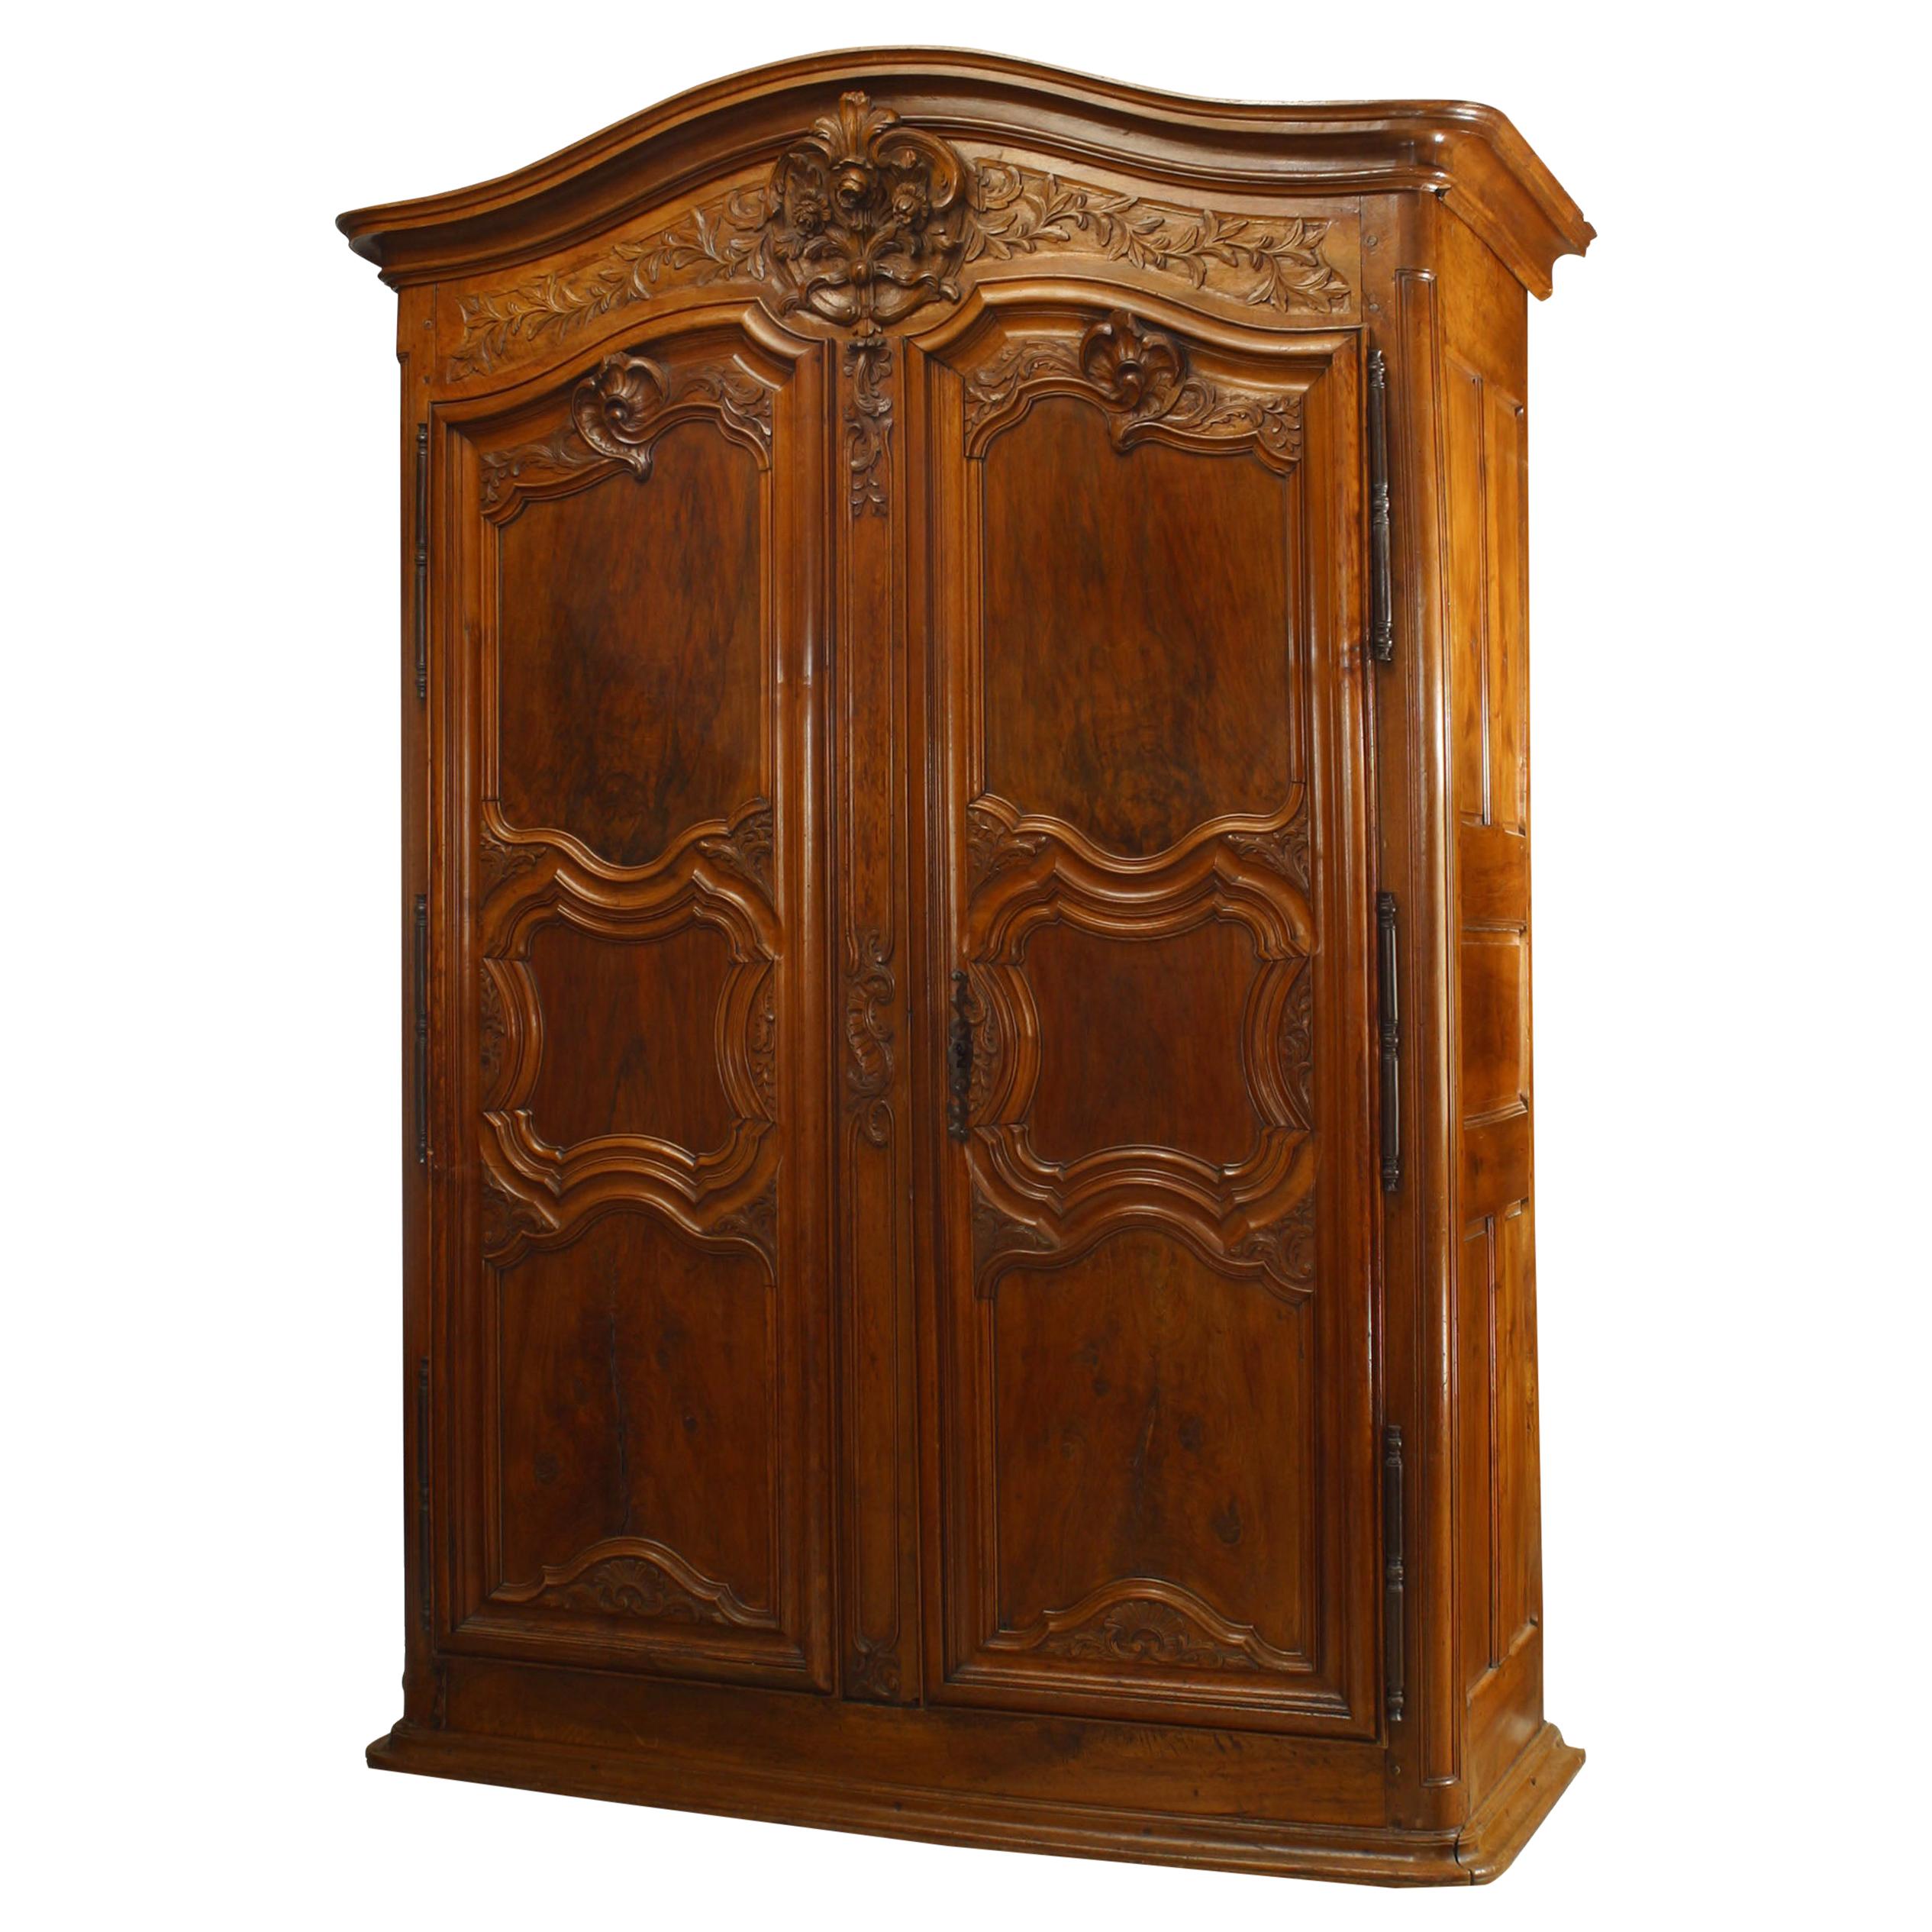 French Provincial 18th Century Walnut Armoire